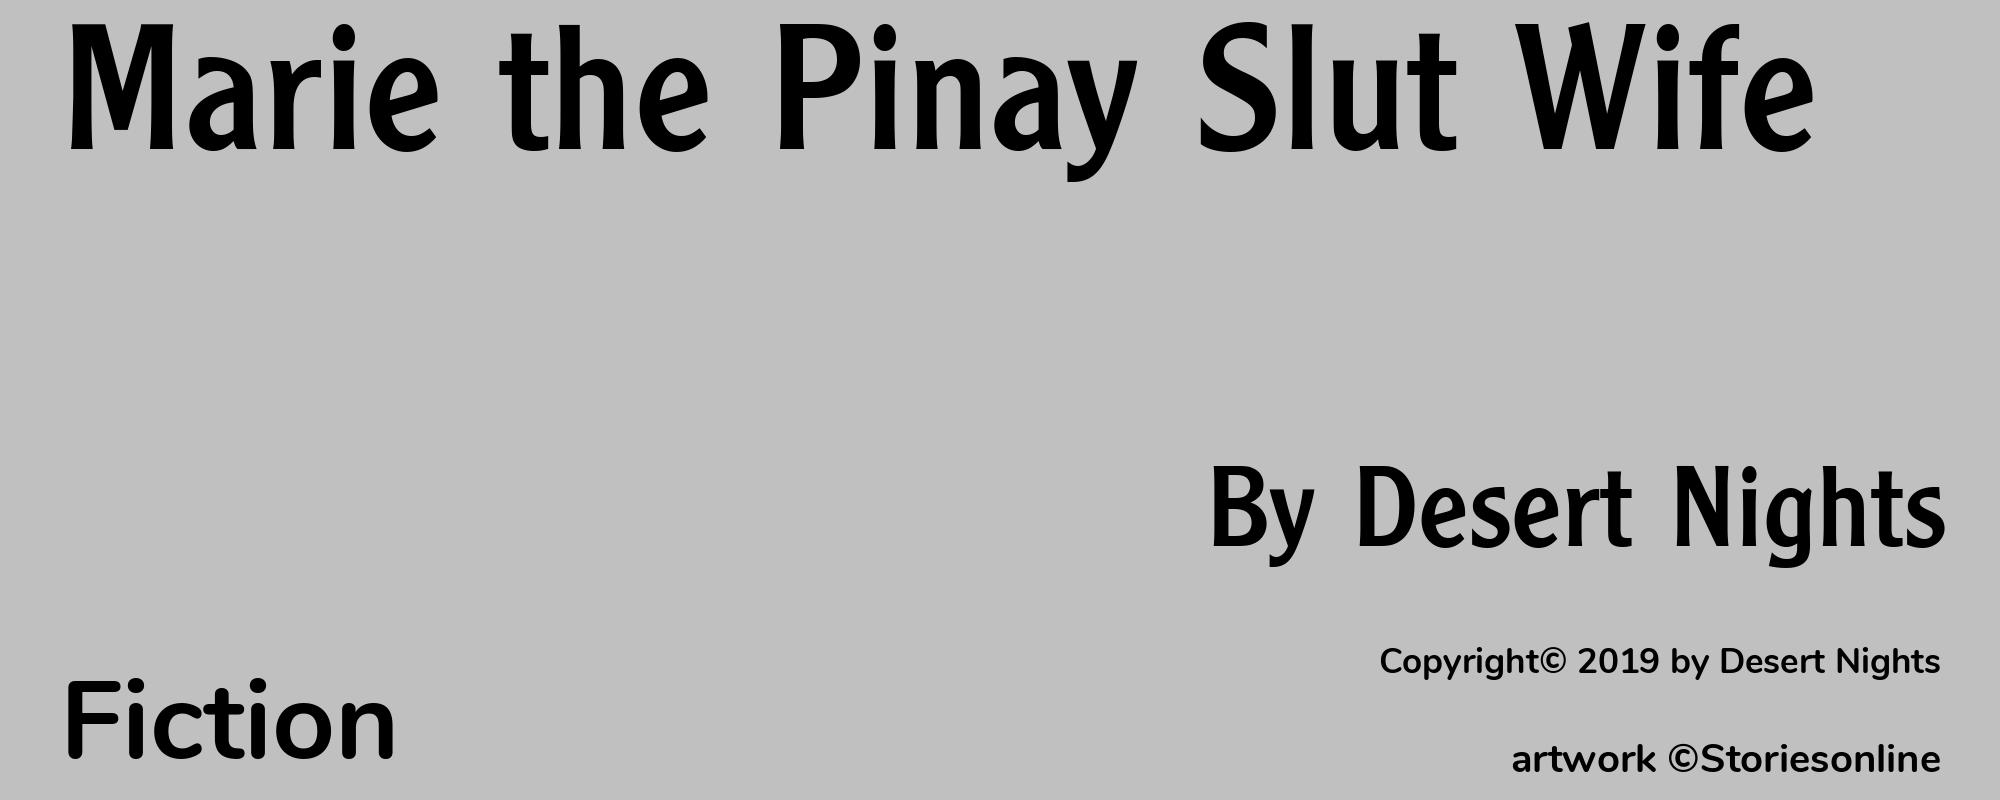 Marie the Pinay Slut Wife - Cover